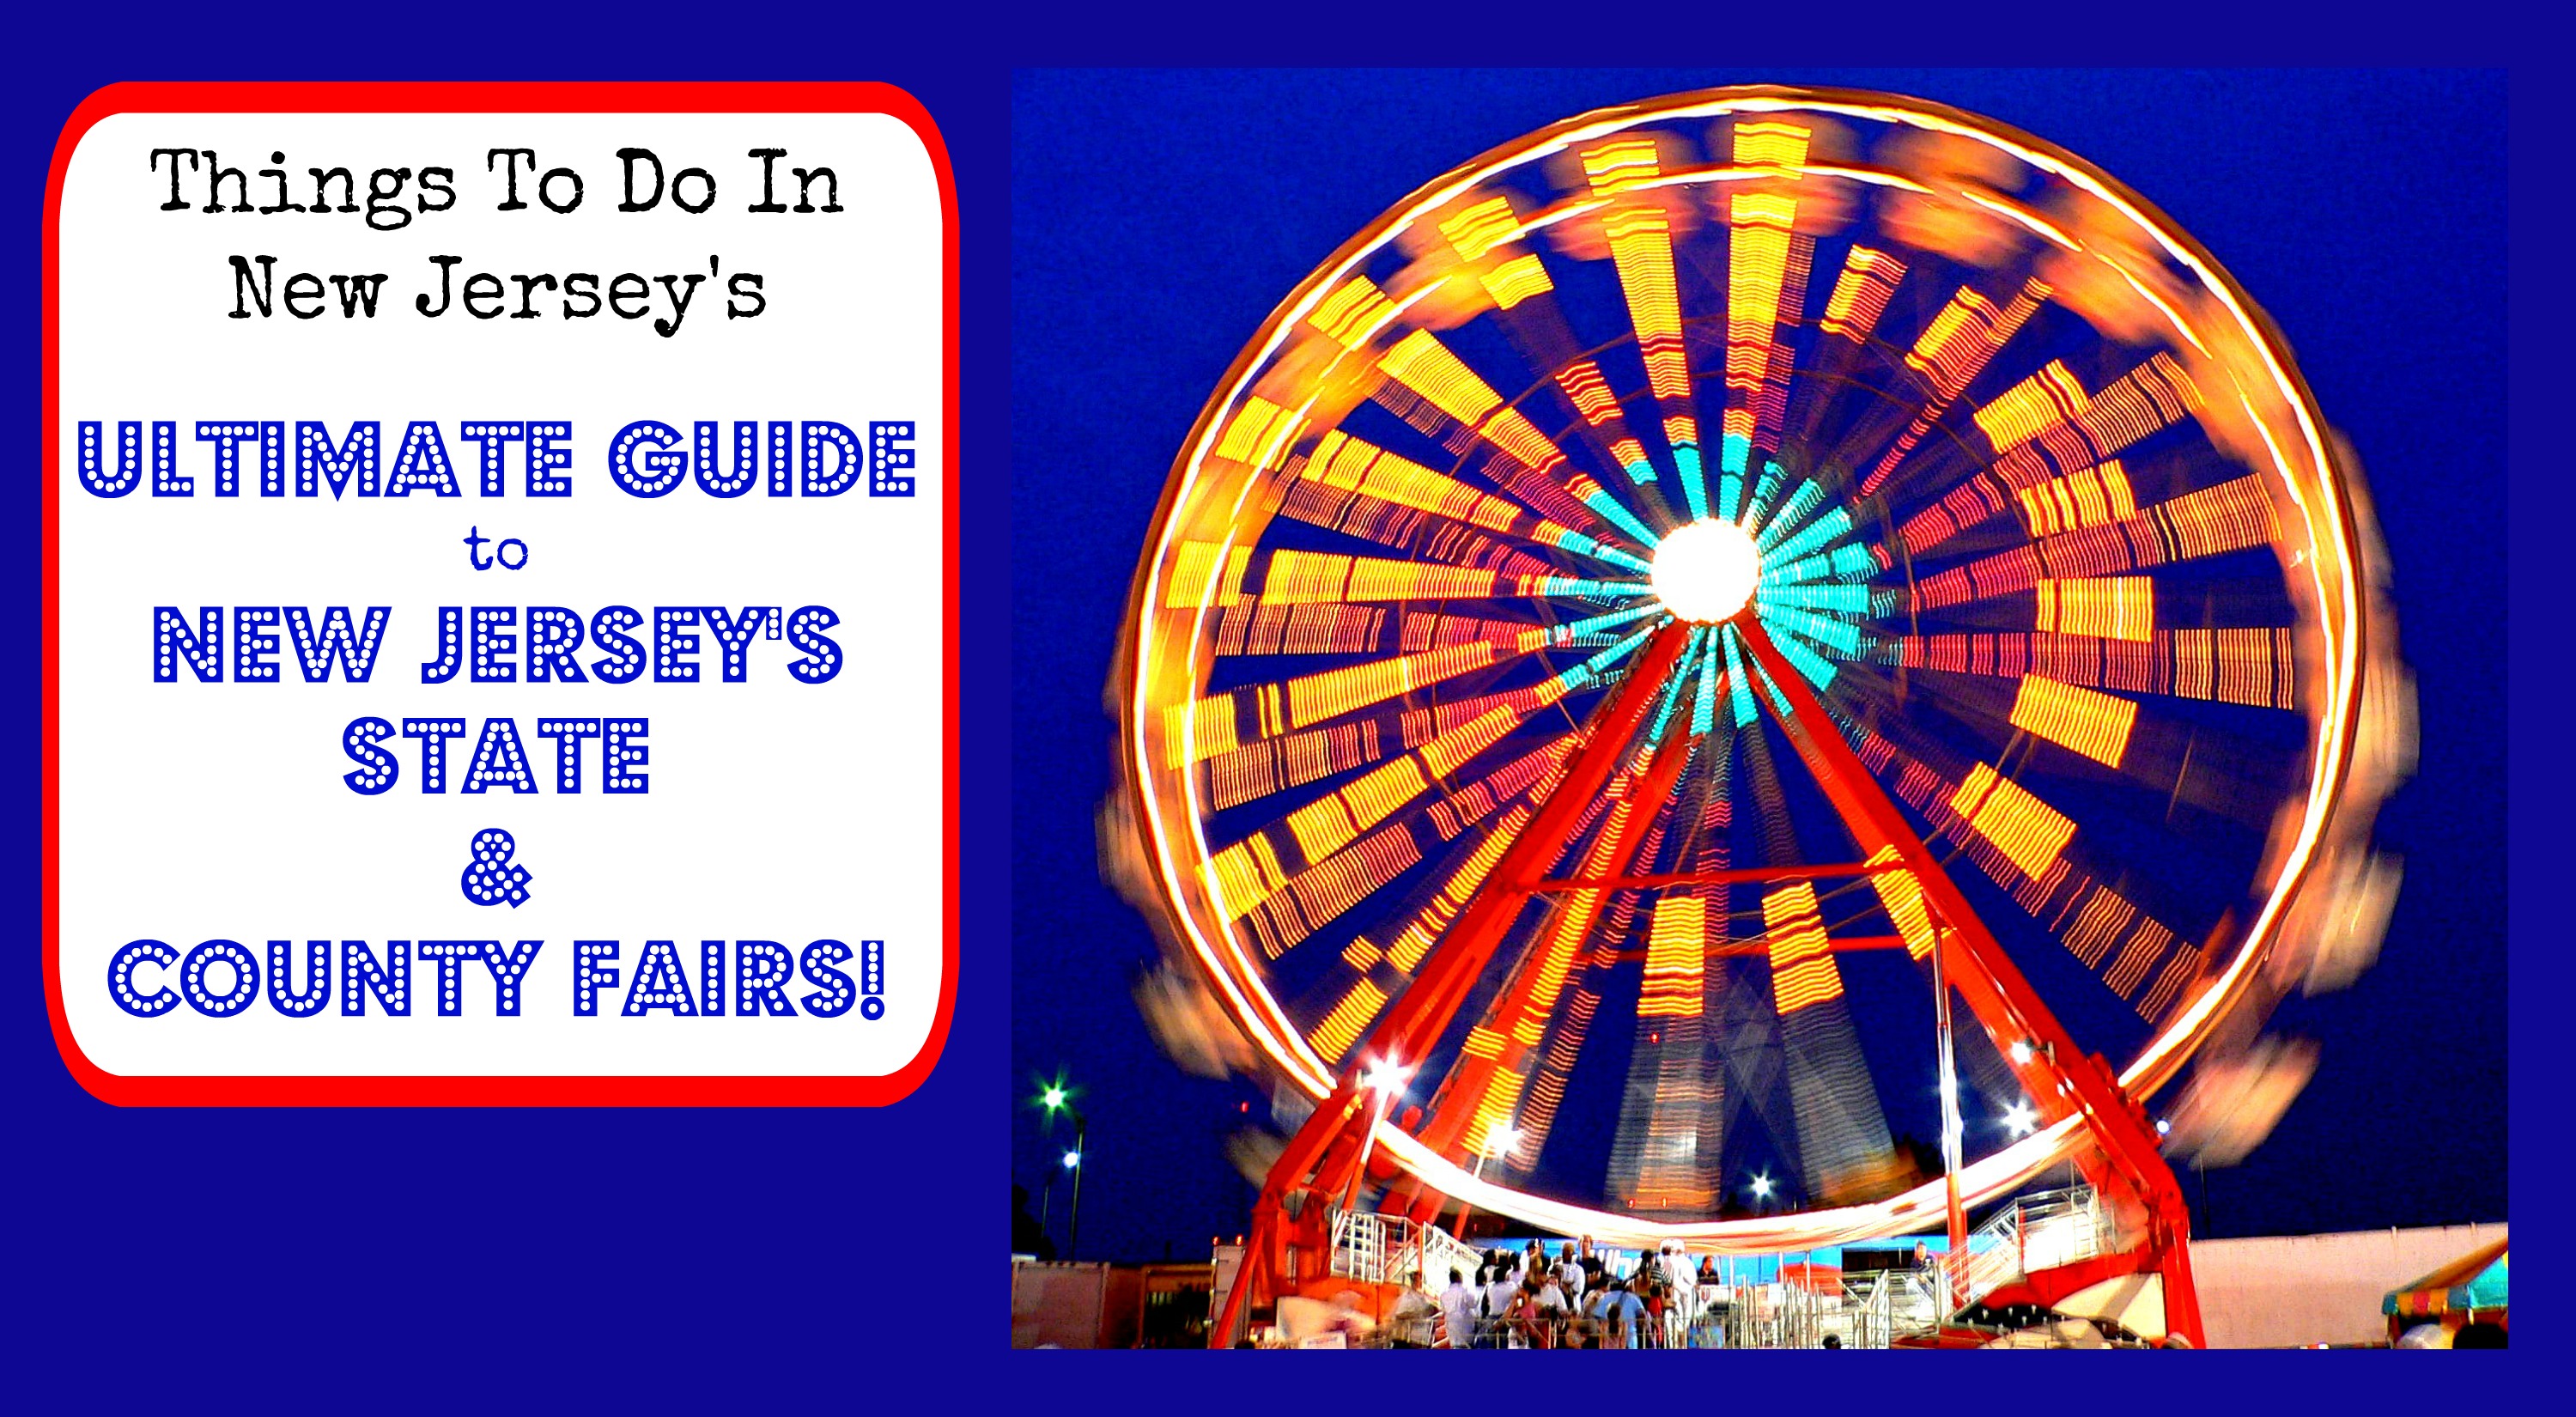 County Fairs In New Jersey